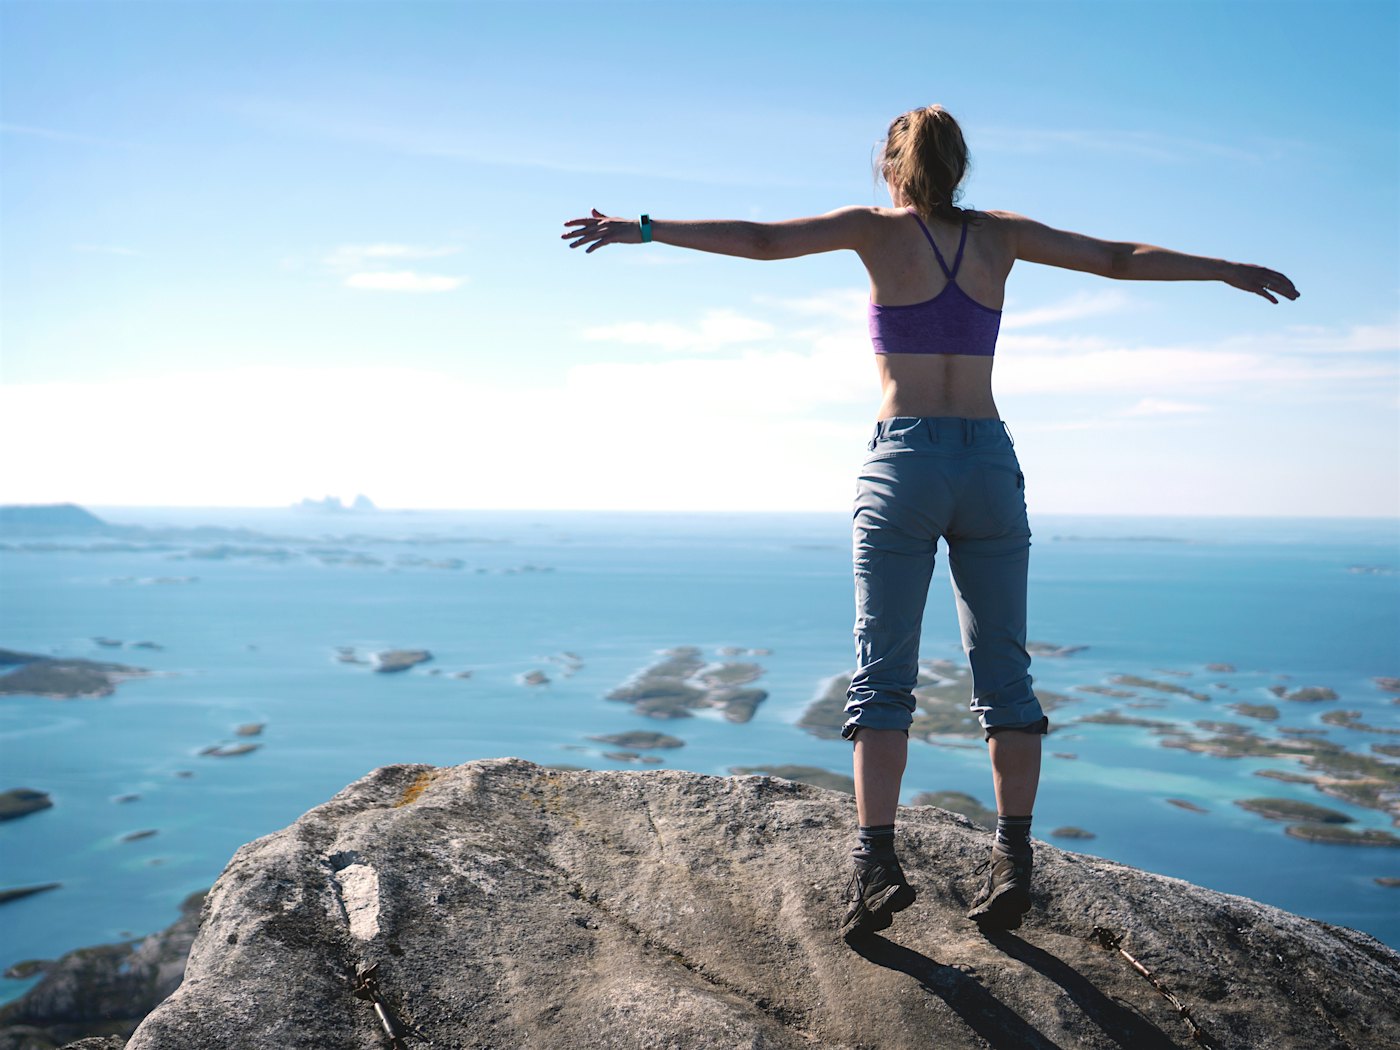 Girl stands with her arms out on a mountain top and looks out over the view. Photo